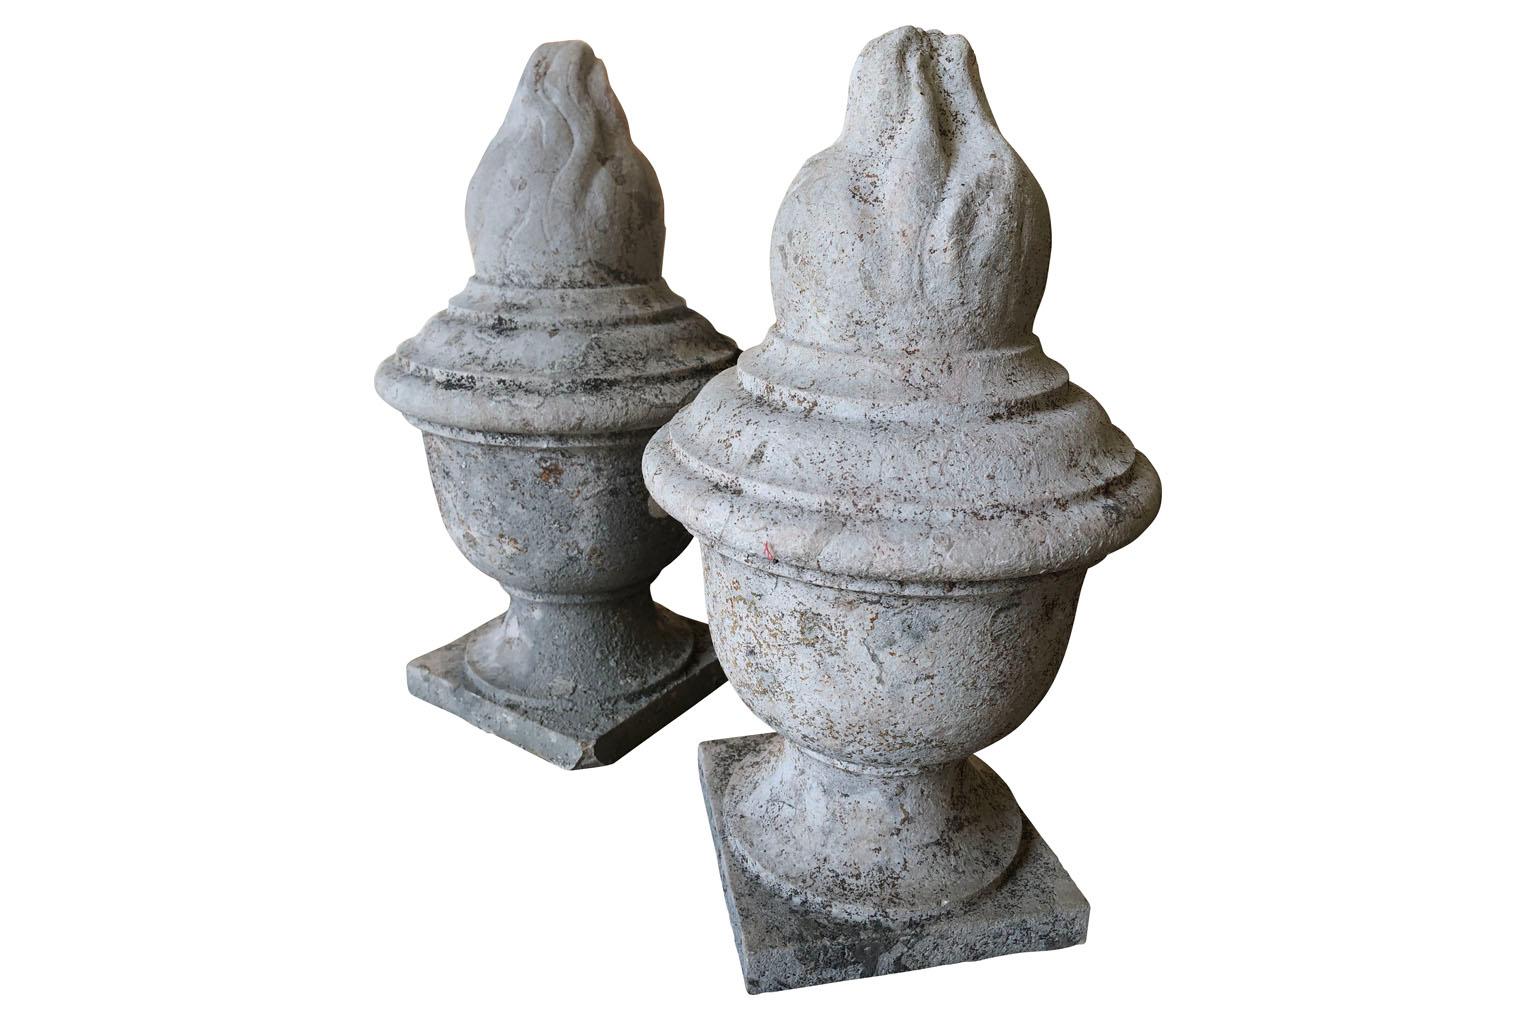 A stunning pair of early 19th century Flambeaux - Flame finial statues - expertly carved from Pierre De Bourgogne - stone from the Burgundy region of France. The flame represents eternity. Wonderful patina. Perfect for any interior or garden.